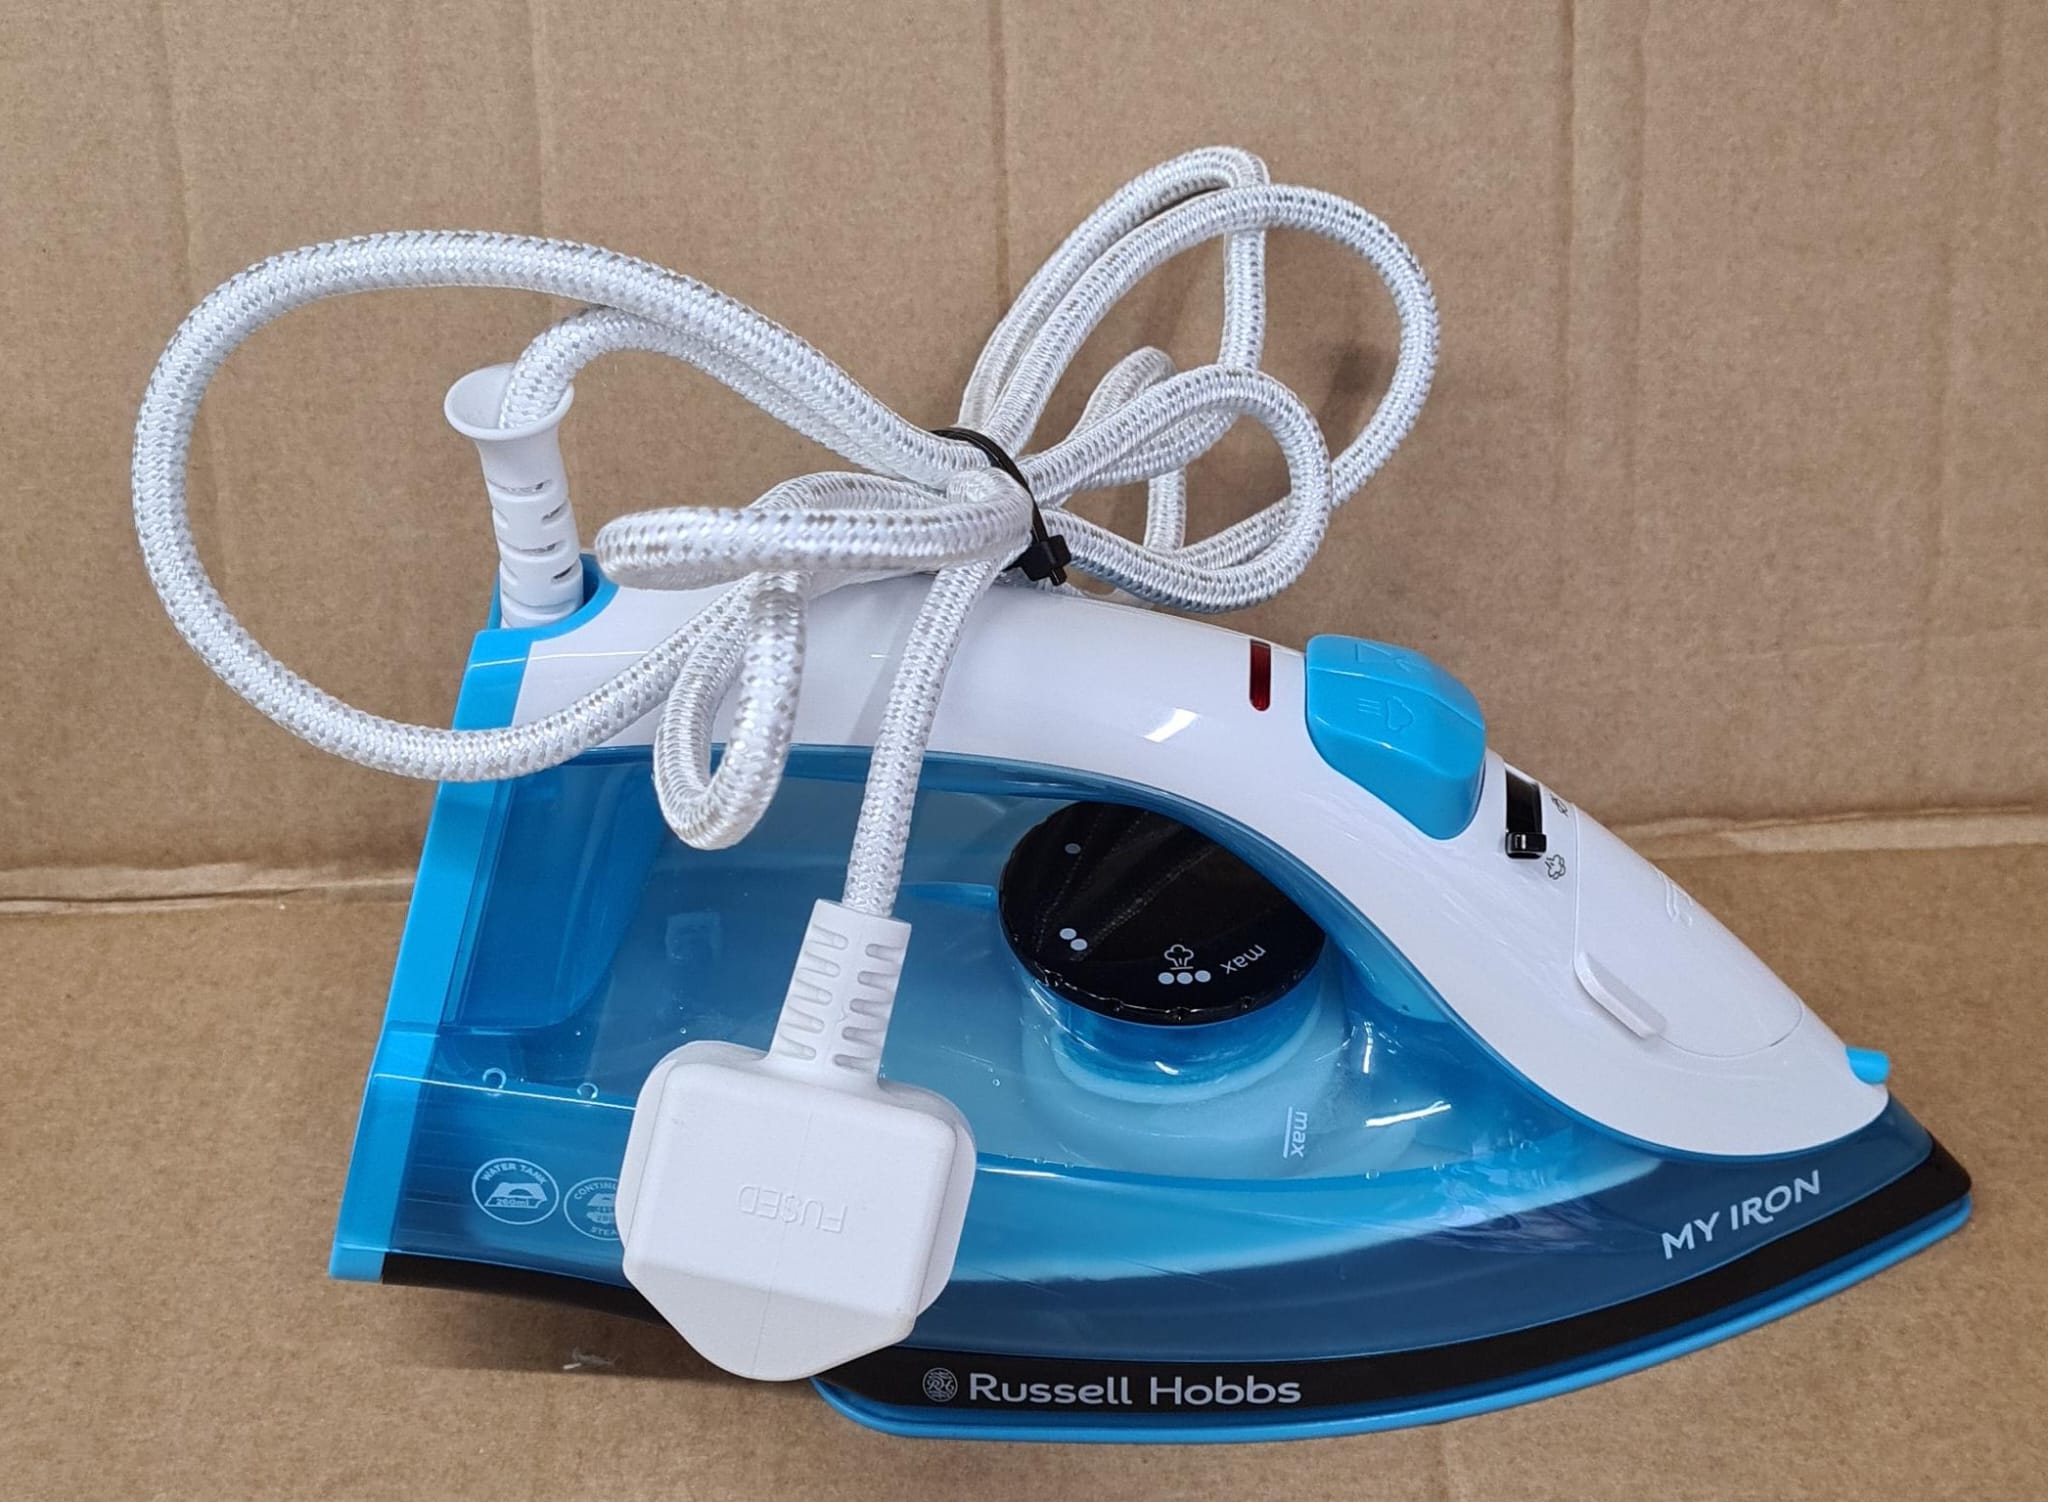 Russell Hobbs 25580 Steam Iron 1800W, 0.26L - Blue and White-4497A